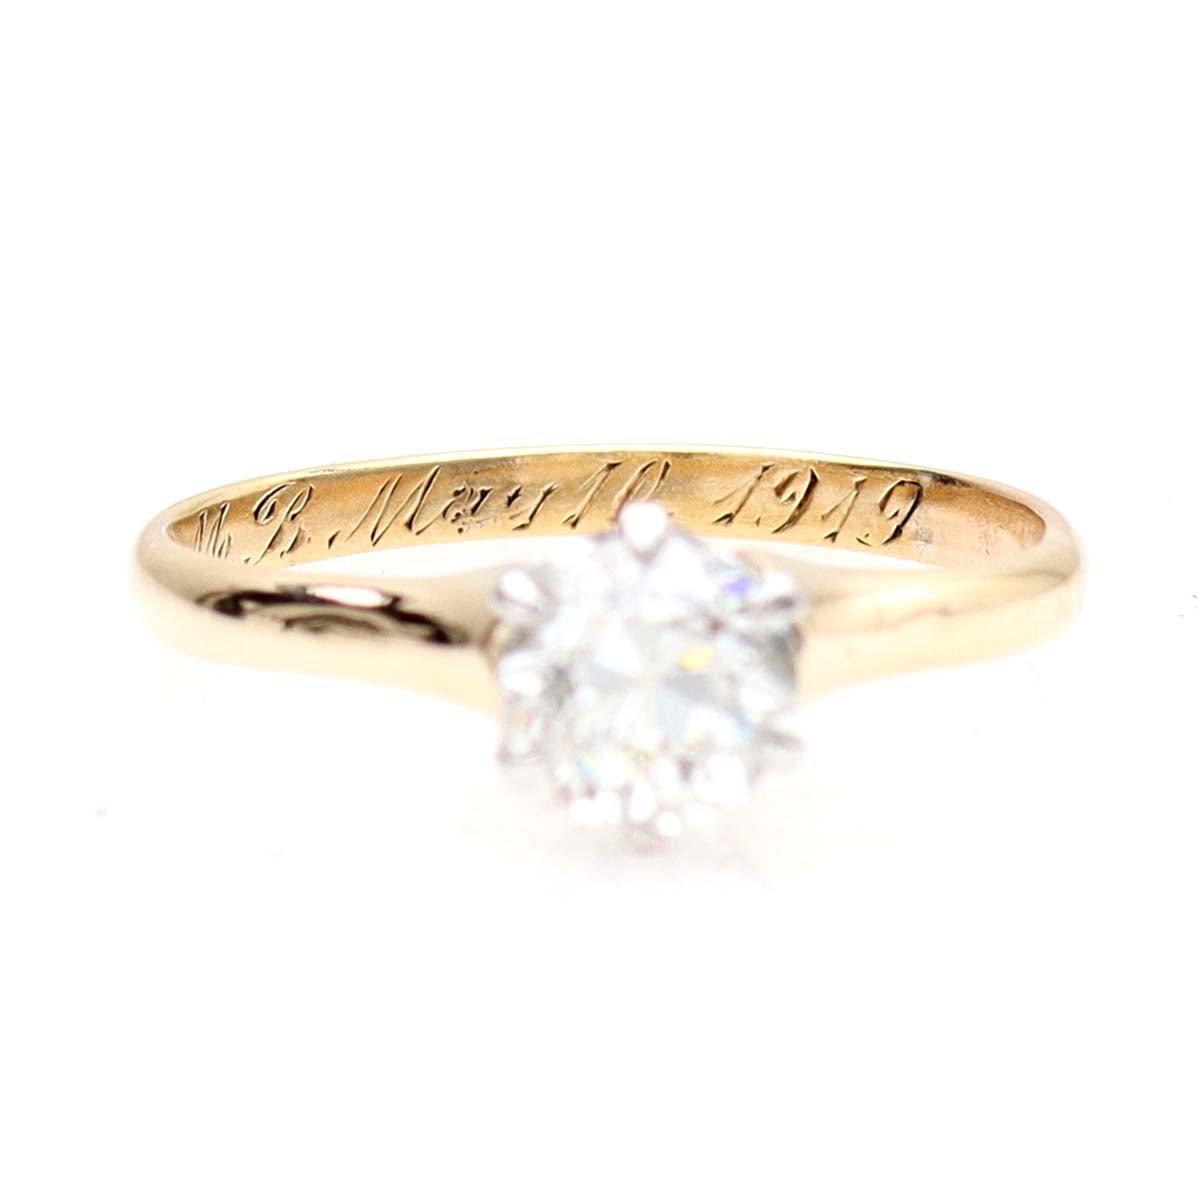 Early 1900s Old European Cut Diamond engagement ring #VR230516-1